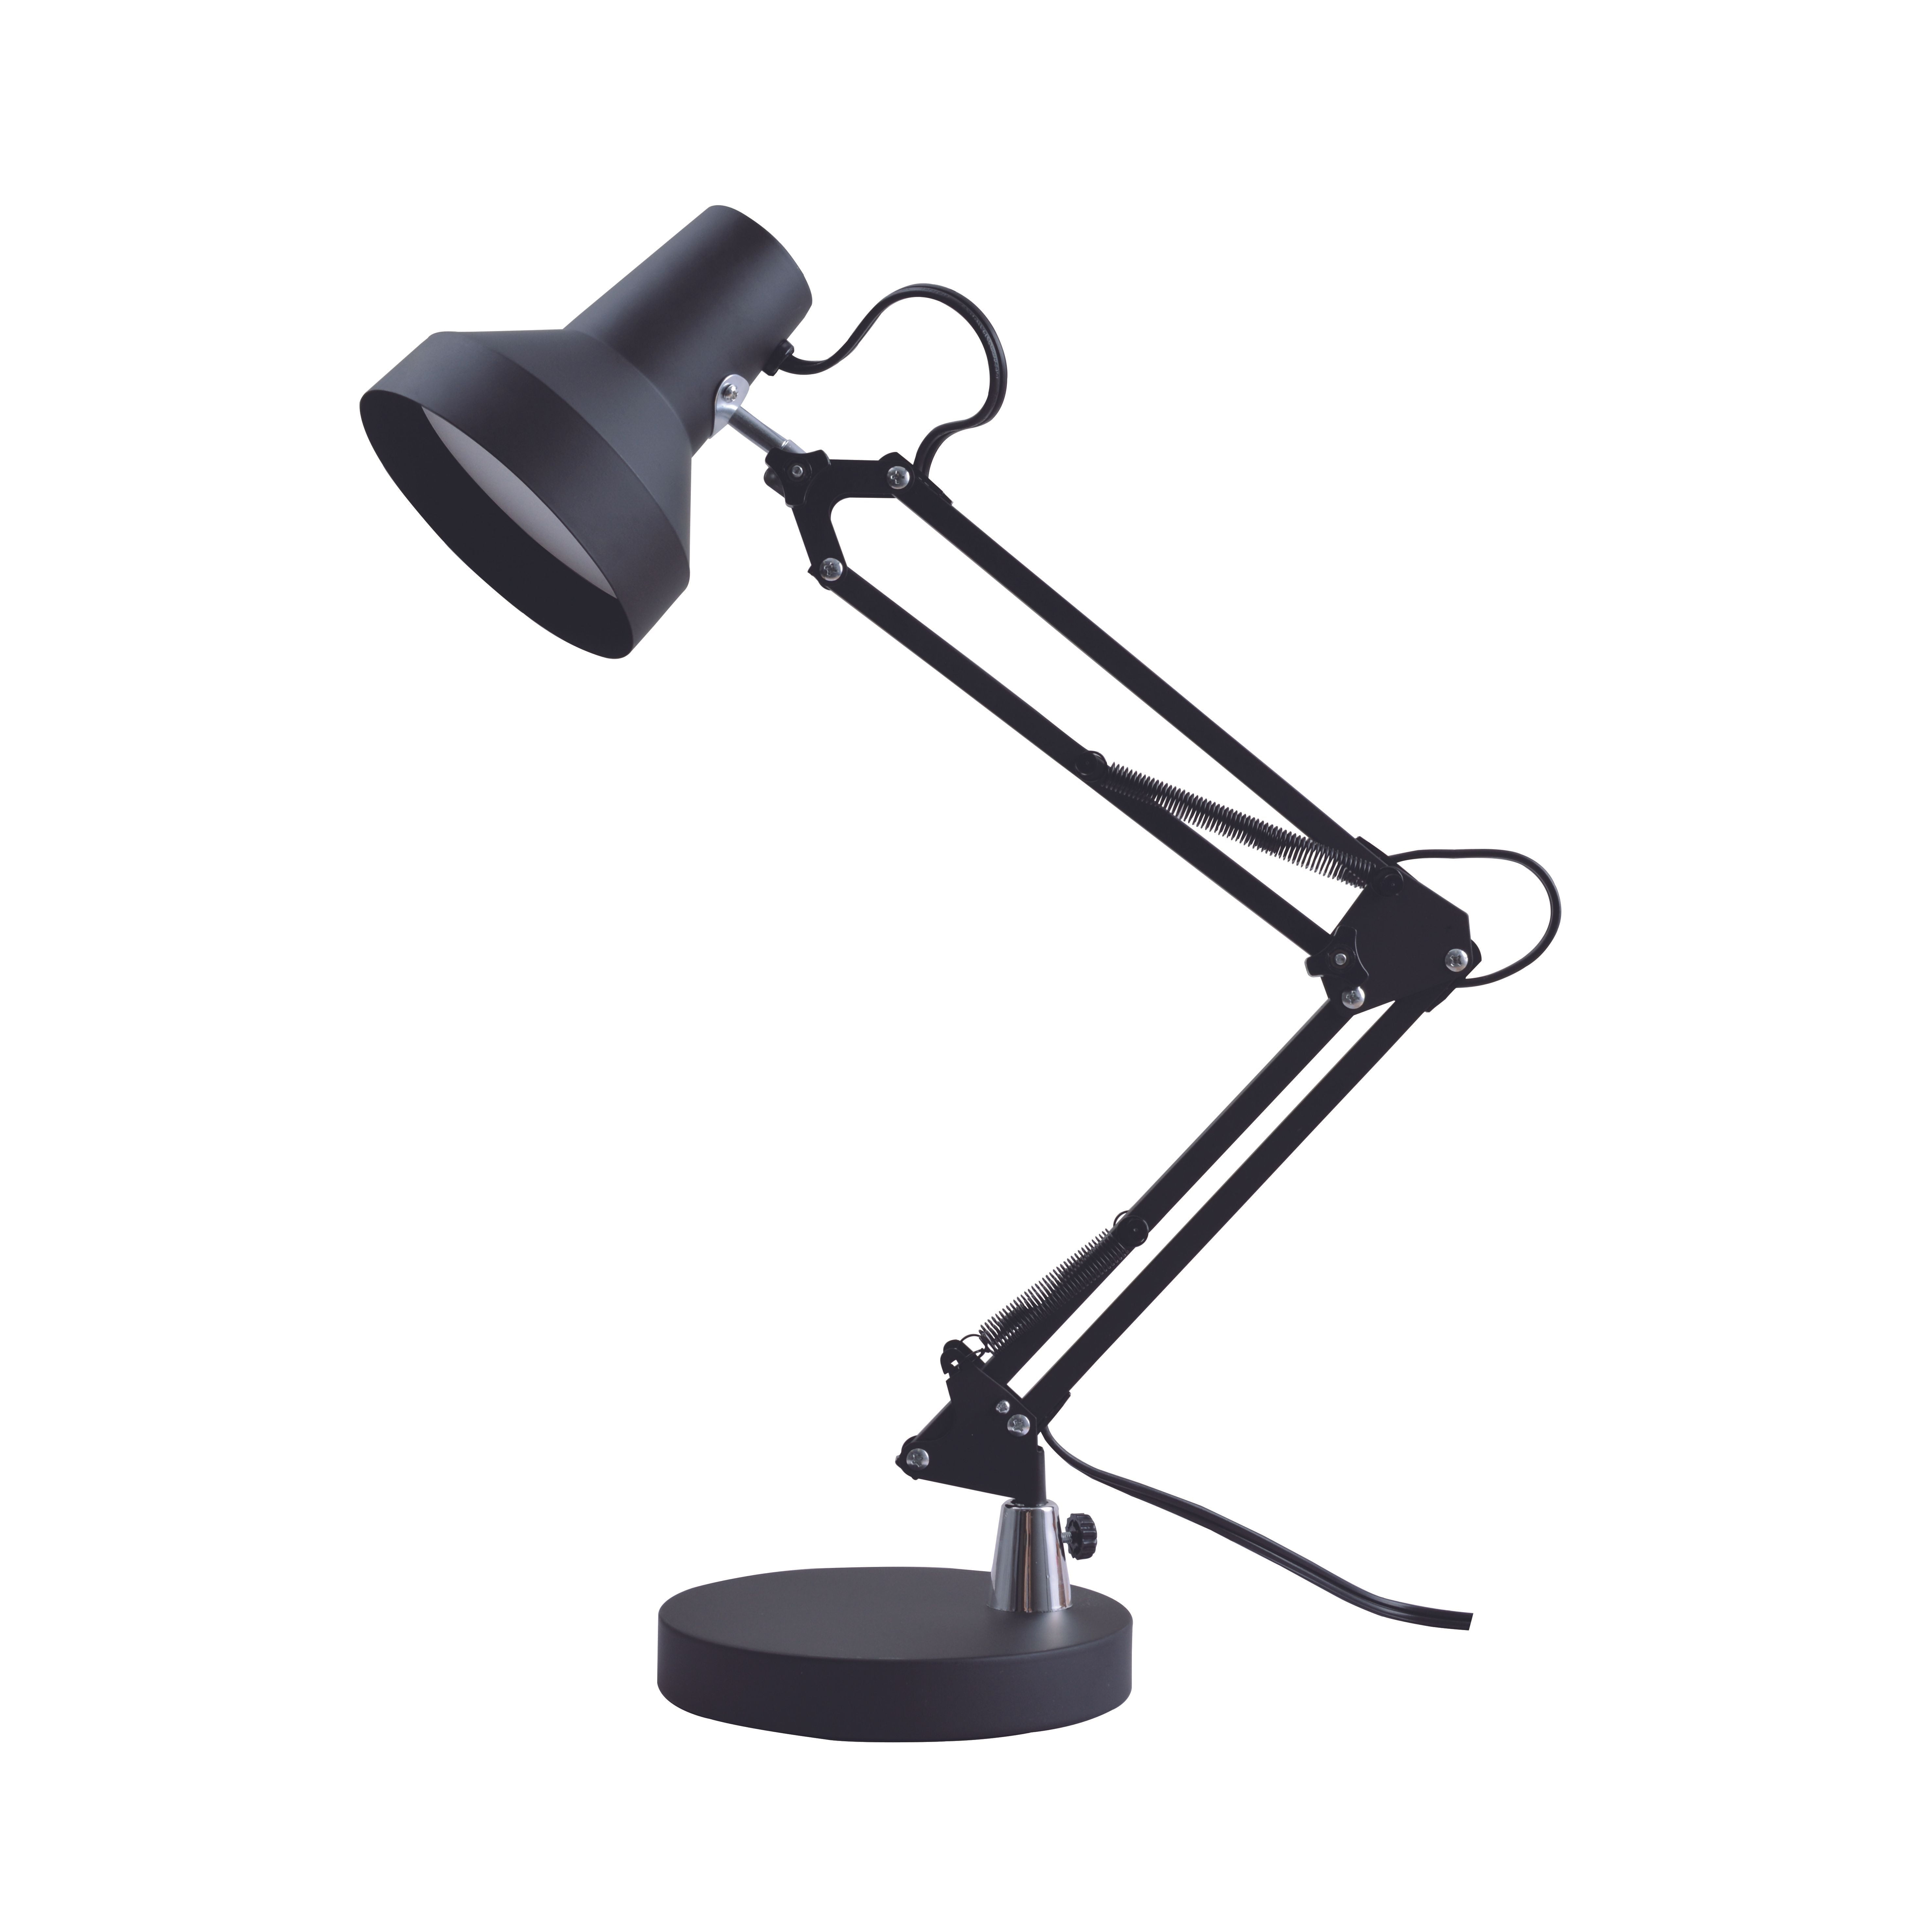 amp Clip On LED Light Craft Reading Table Desk Lamp Funny  Chic  Available